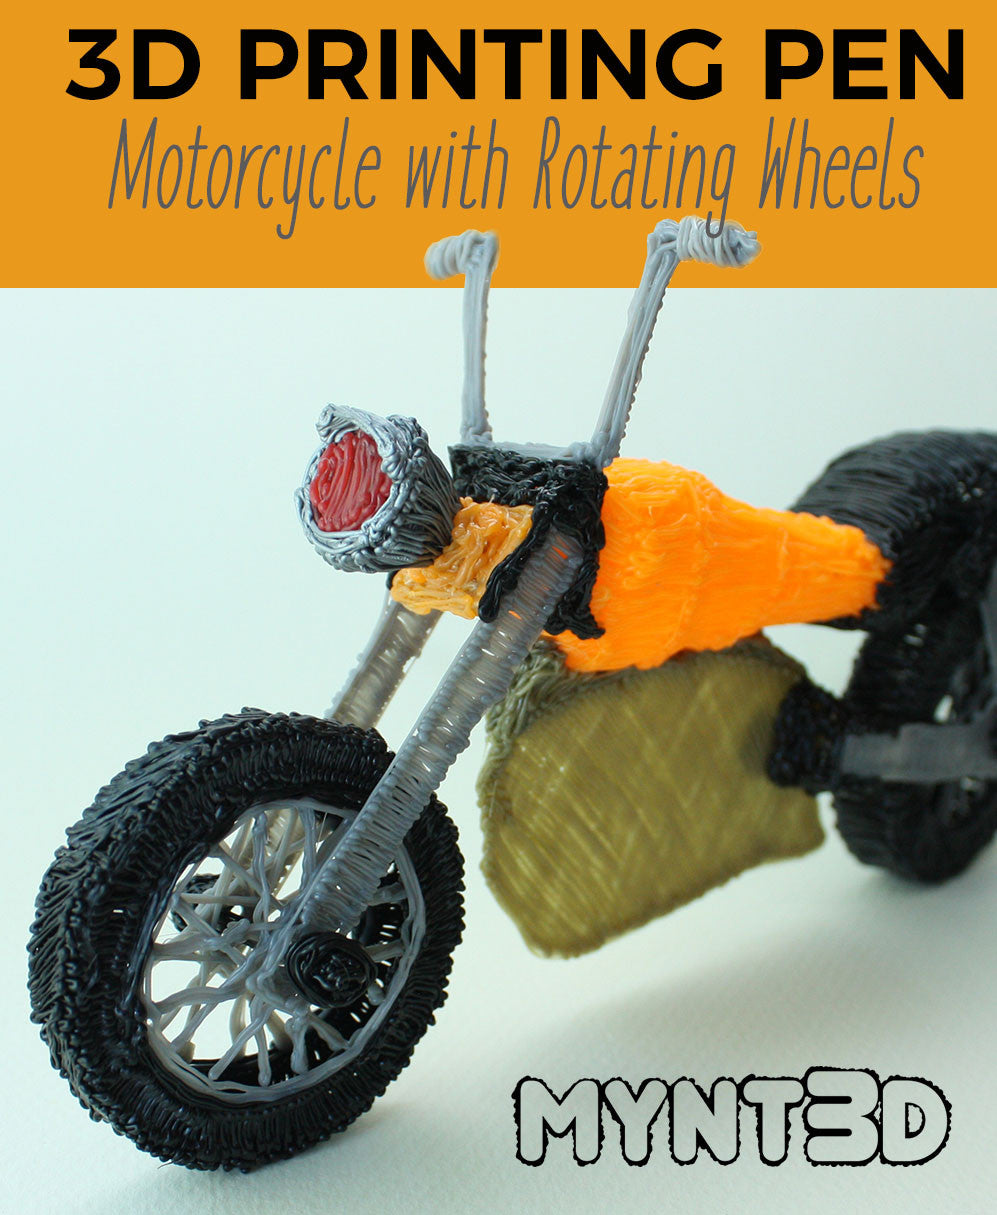 How to Make a Motorcycle with a 3D Printing Pen